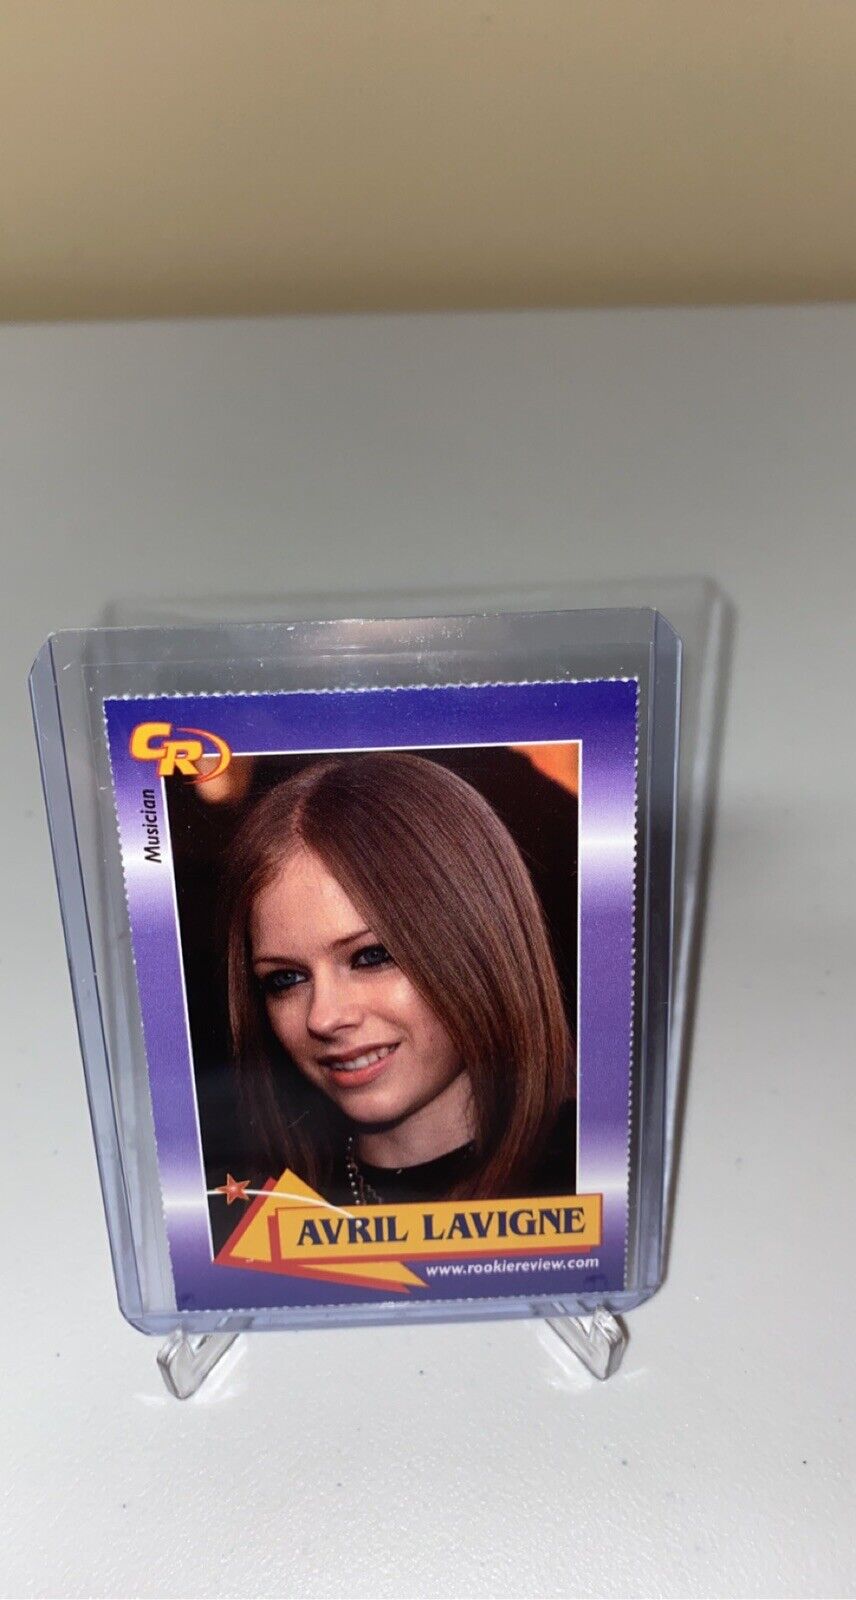 Celebrity Review 2003 Avril Lavigne Rookie Review Card #8 MINT